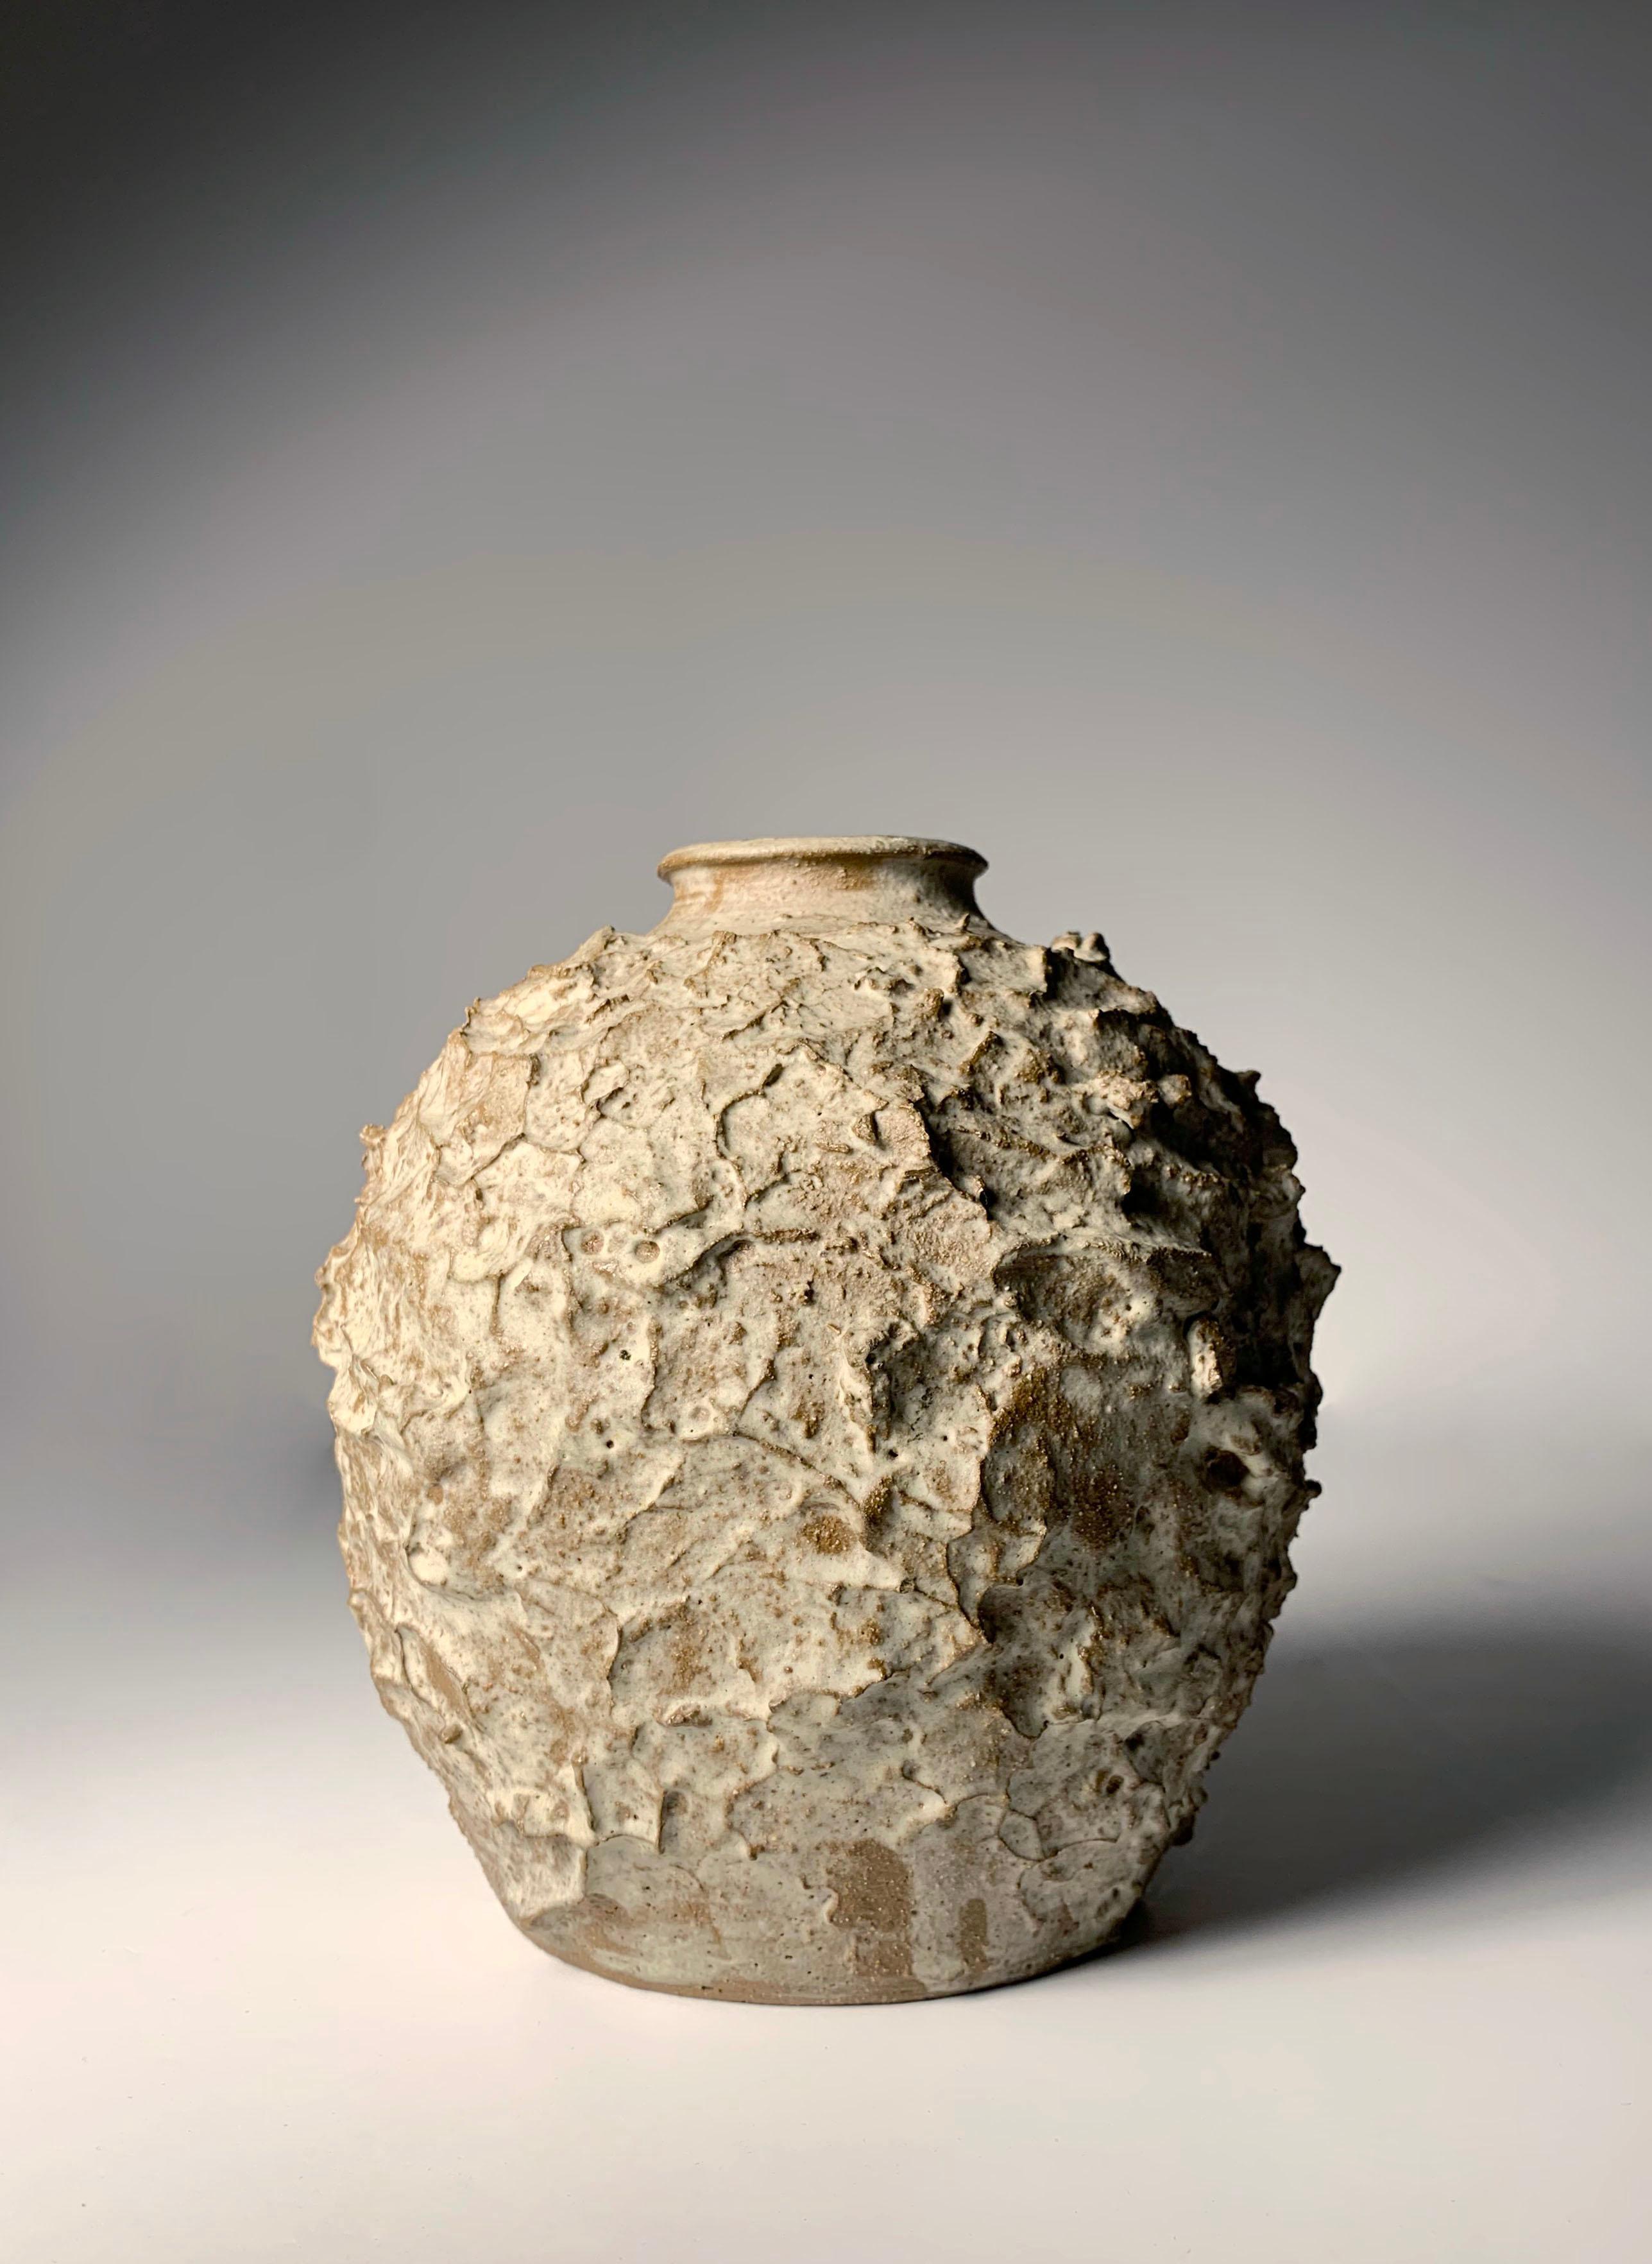 Nice Petite Textured Studio Pottery vase by Peg Tootelian.
A studio handbuilt piece. The neck/top is intentionally left uneven.

Illinois artist PegTootelian apprenticed with Edna Arnow in the 1950s and exhibited at the Syracuse Ceramic Nationals in